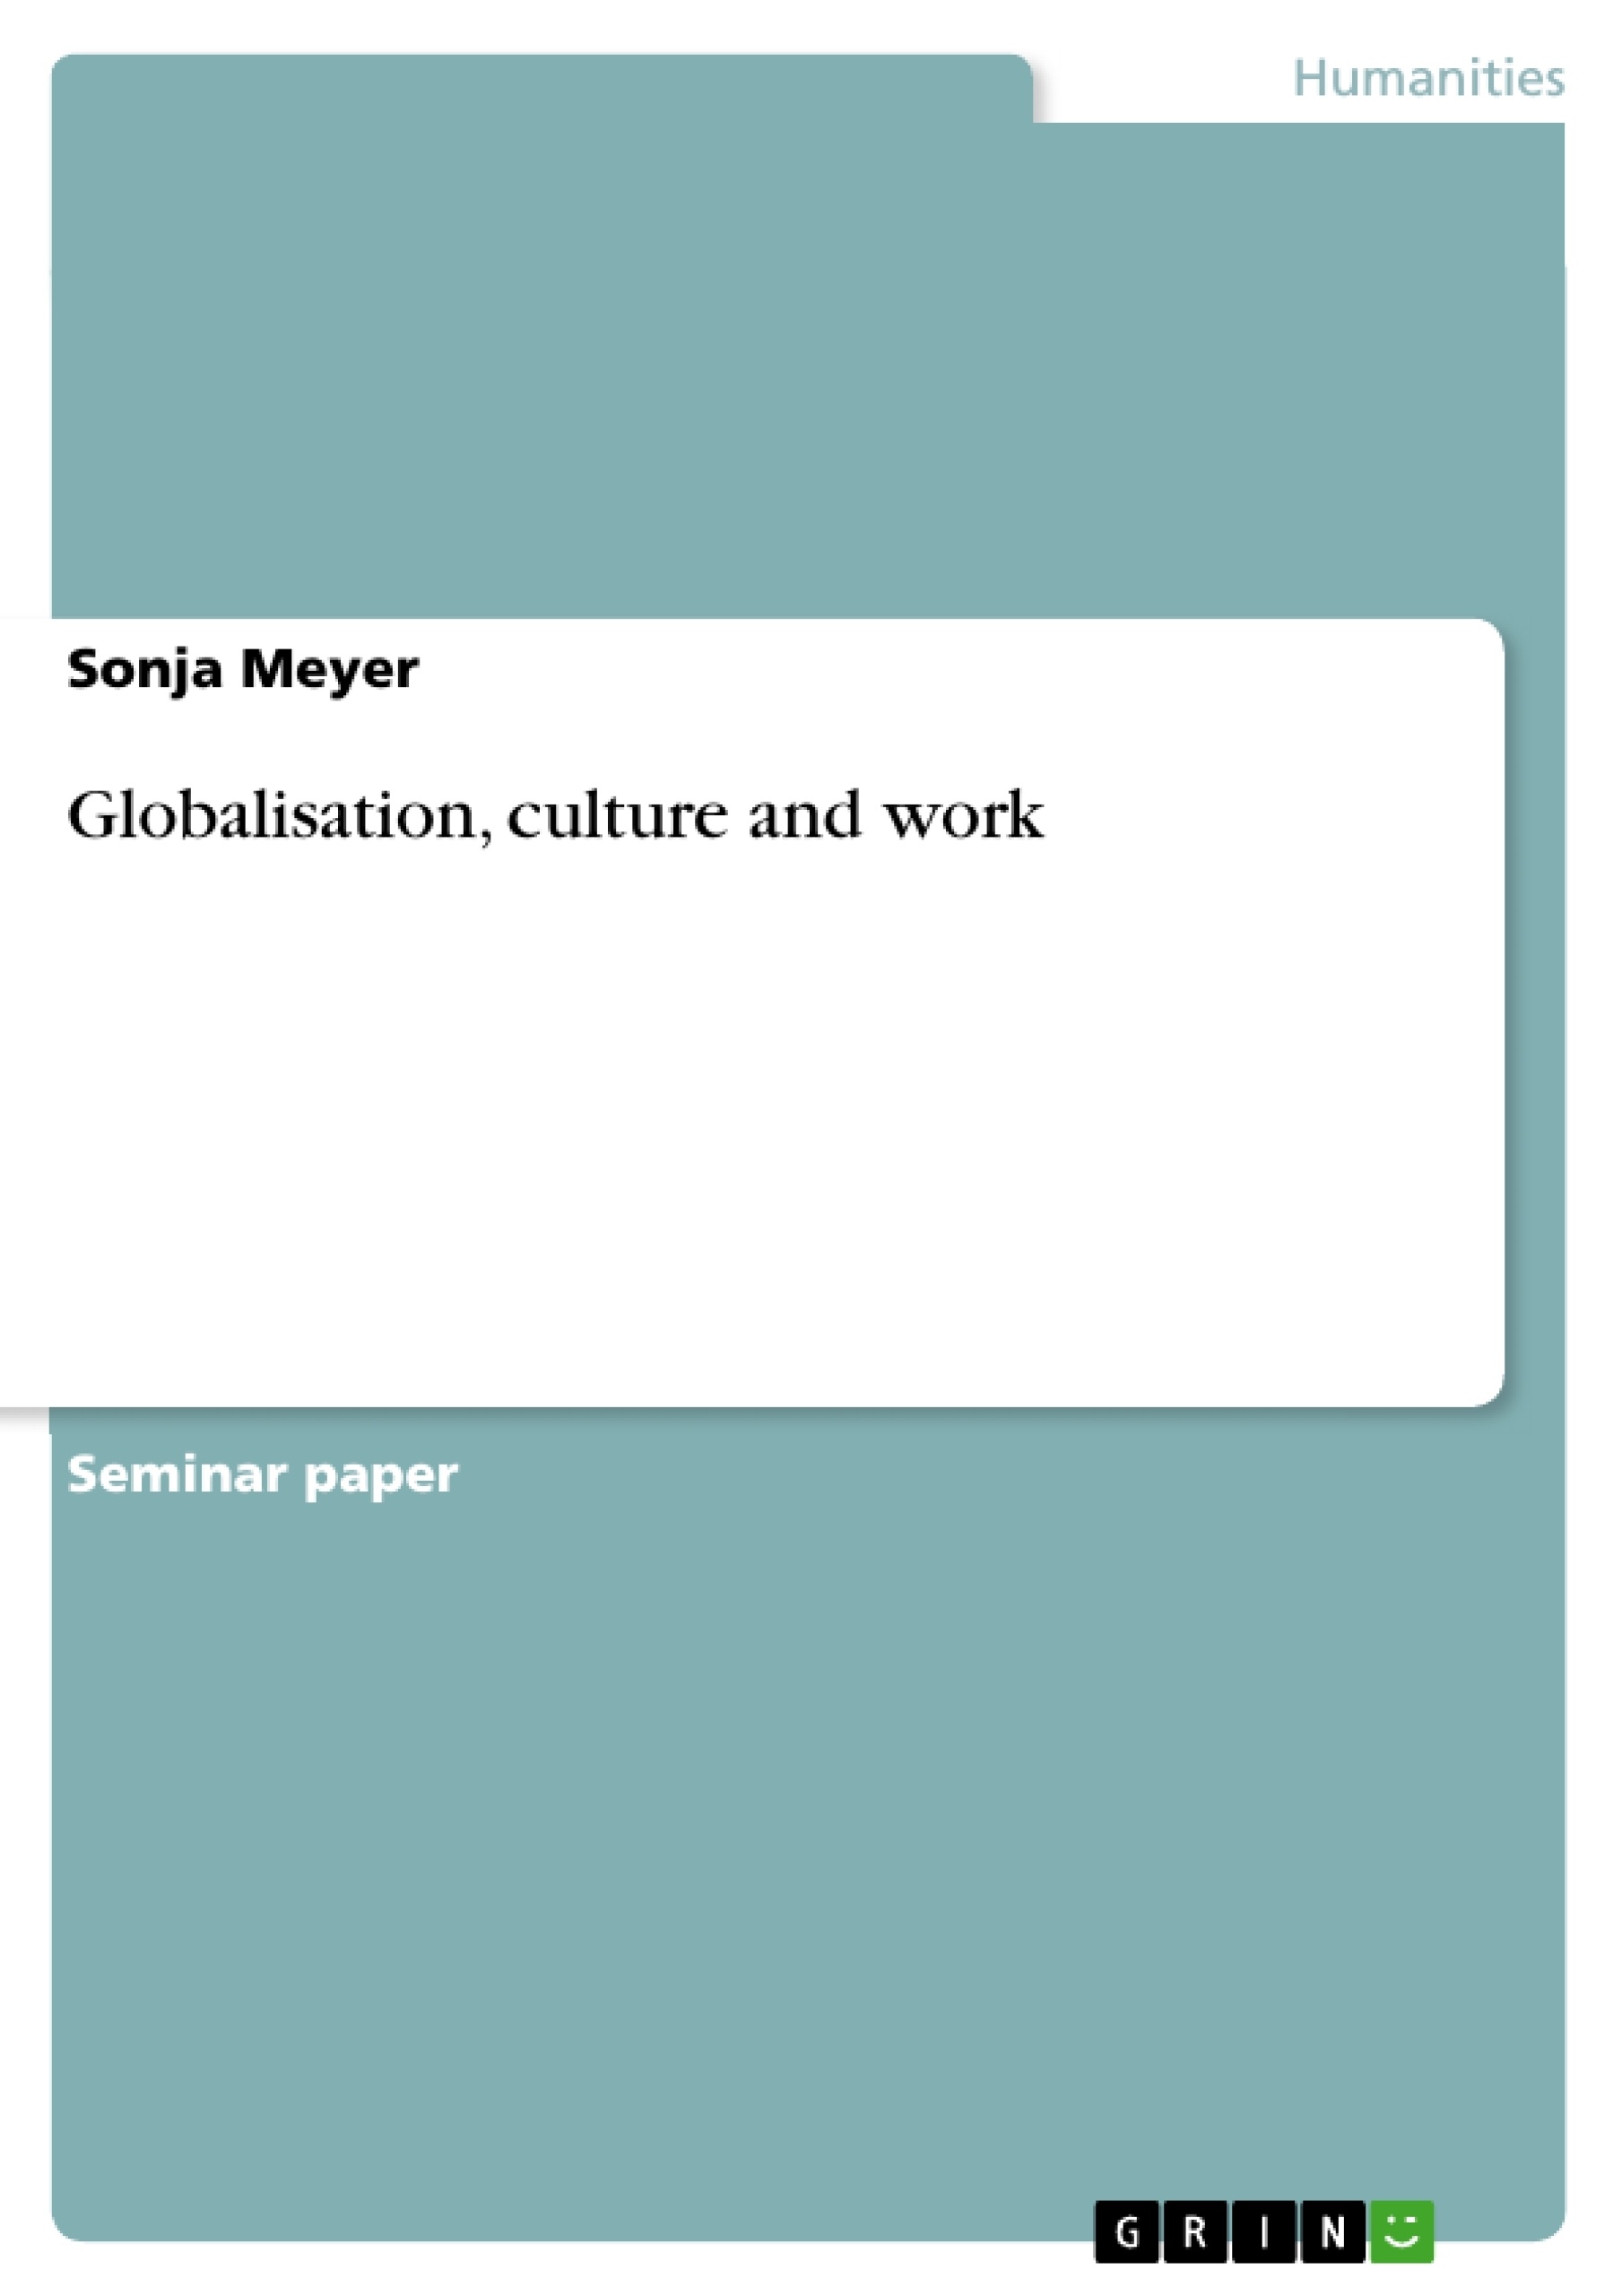 Title: Globalisation, culture and work